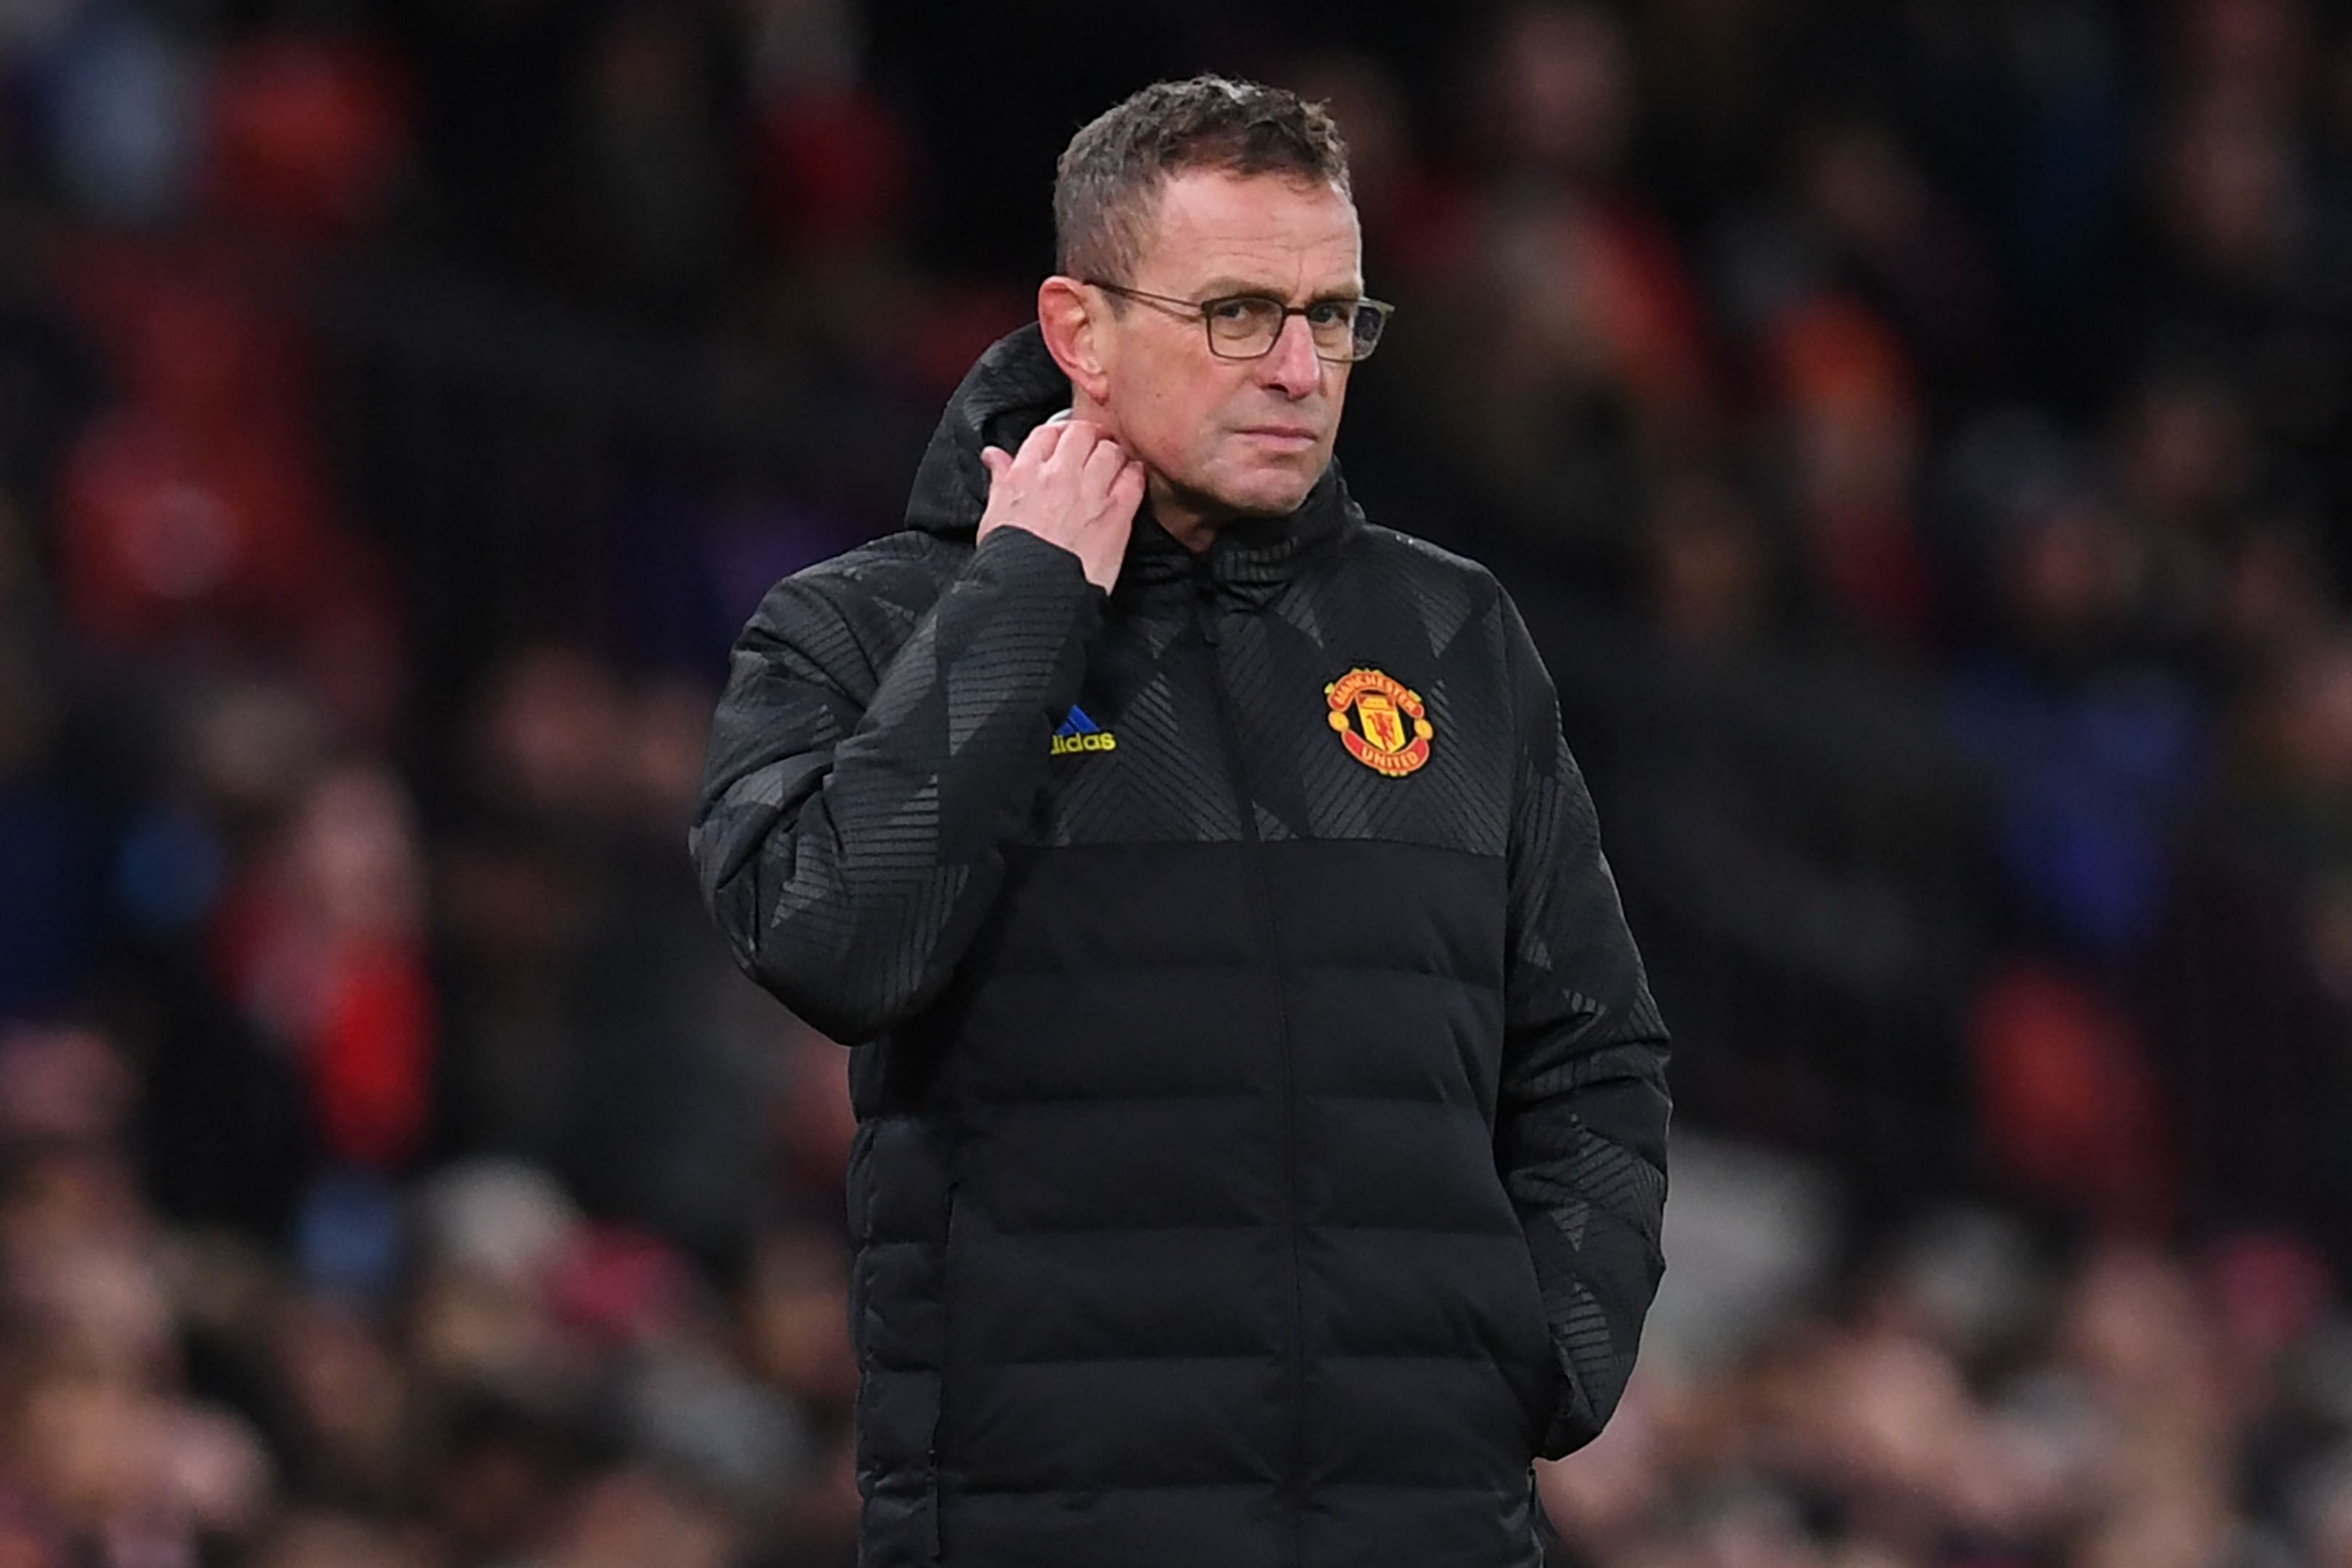 <p>Manchester United German Interim head coach Ralf Rangnick looks on during the UEFA Champions League Group F football match between Manchester United and Young Boys at Old Trafford stadium in Manchester, north west England on December 8, 2021. (Photo by